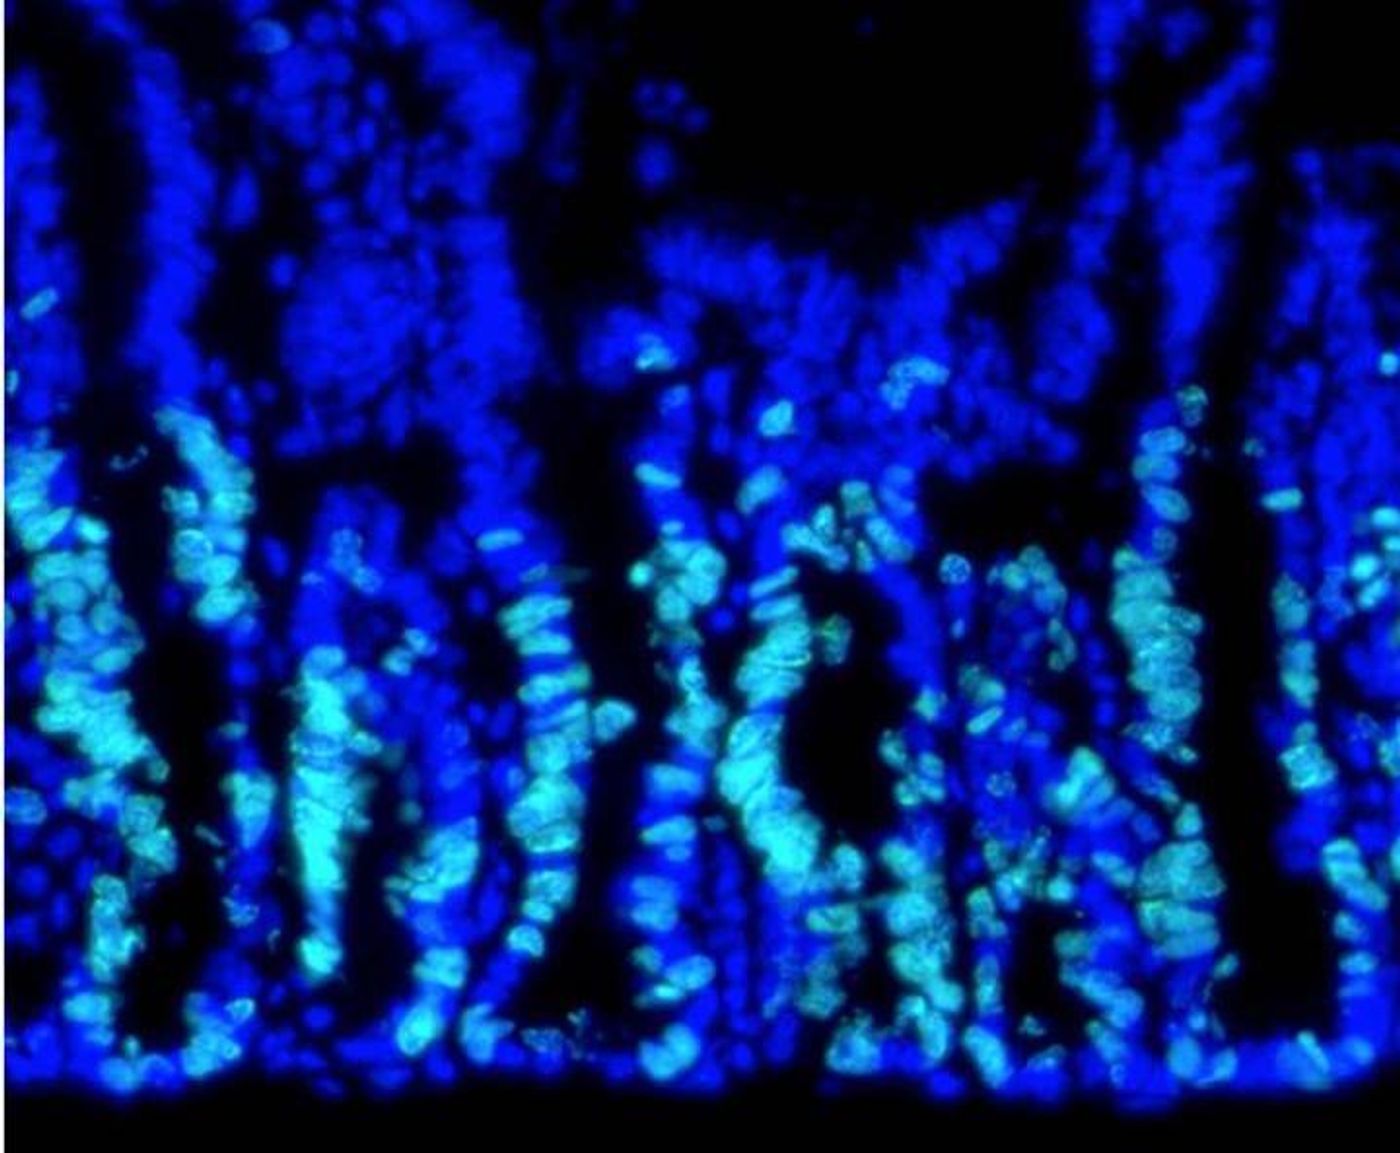 A pale-blue stain shows stem cells multiplying in a mouse's intestine. / Credit: Tontonoz lab/UCLA